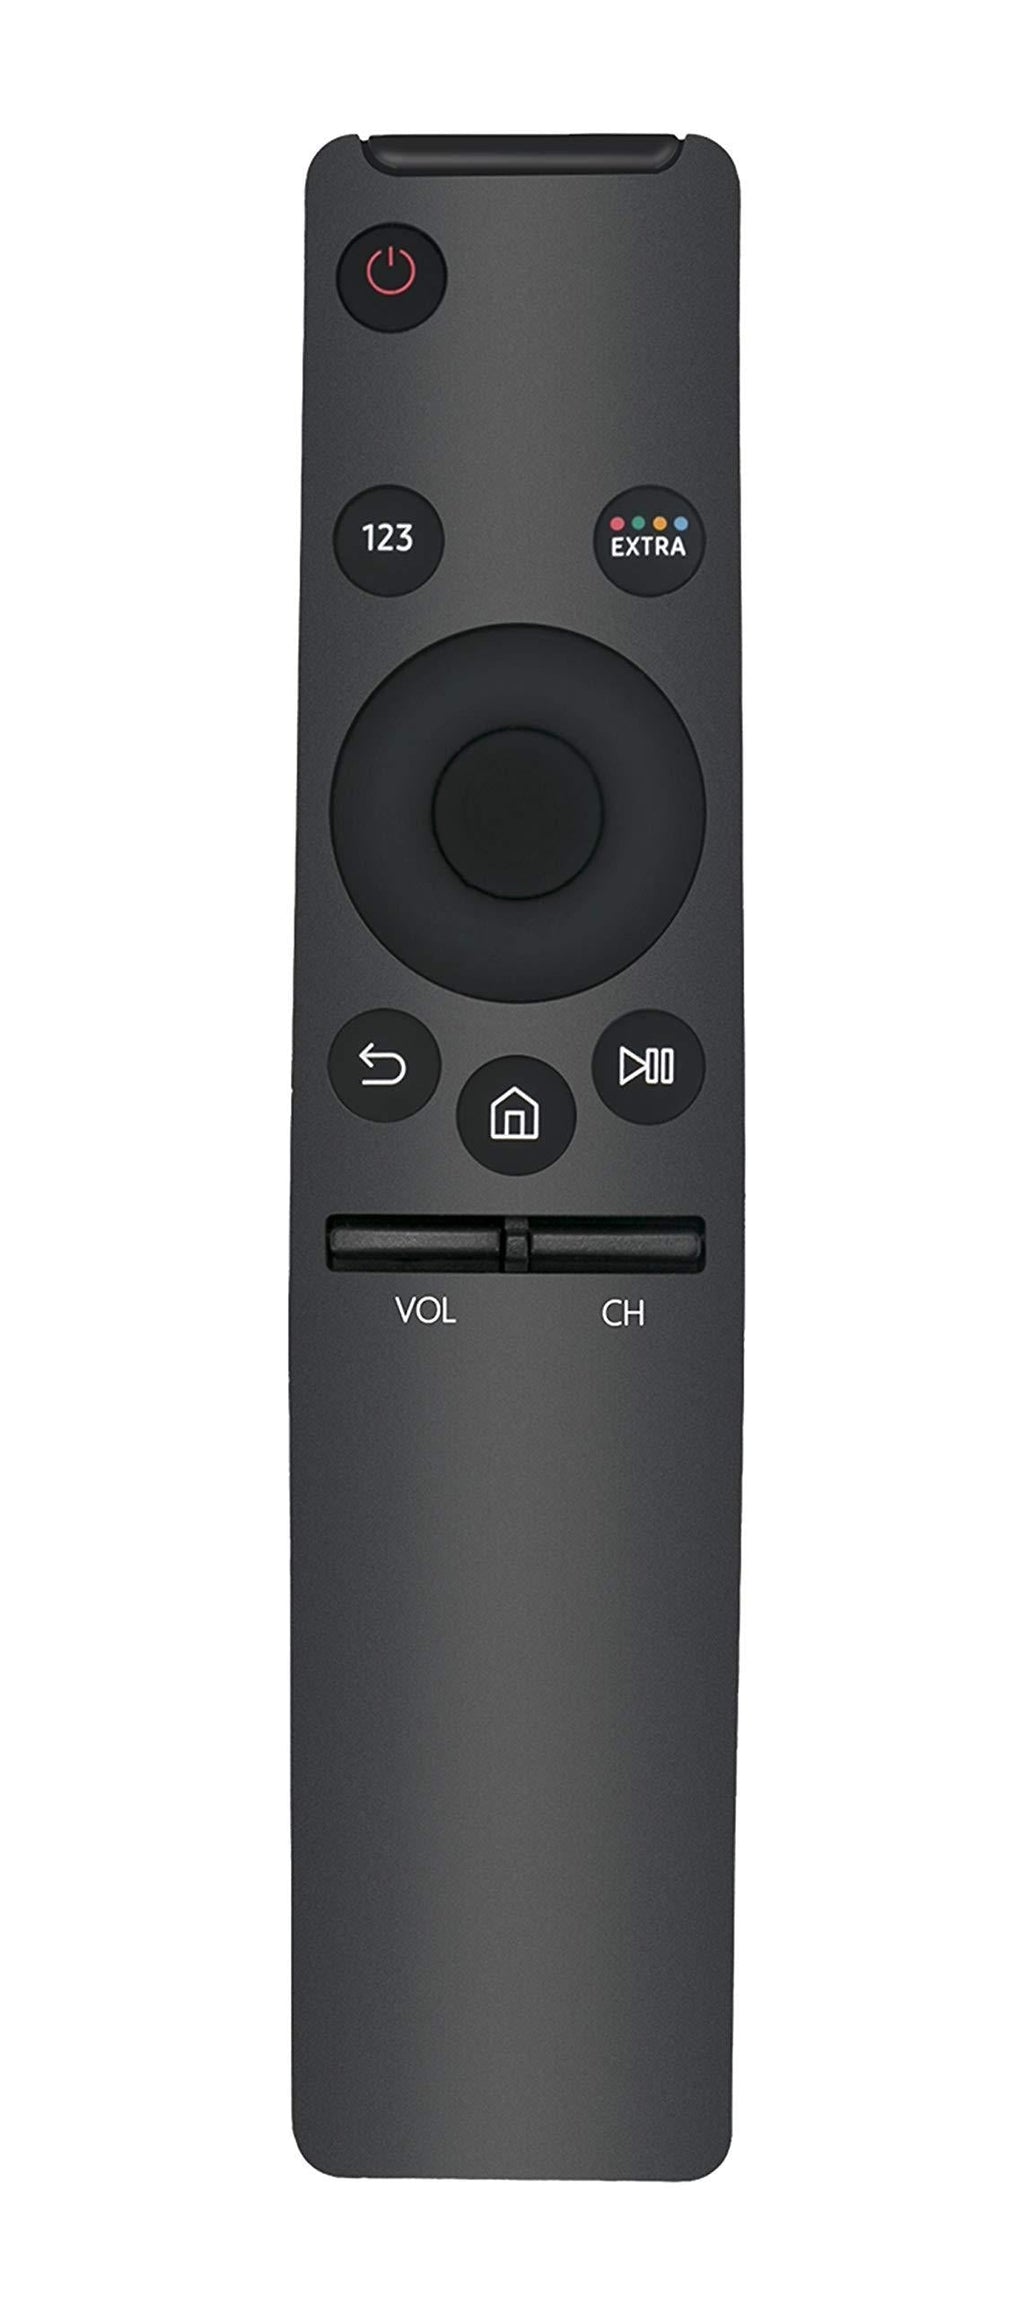 New BN59-01260A Replace Remote fit for Samsung 4k Smart TV UN40KU6300 UN40KU630D UN43KU6300 UN43KU630D UN50KU6300 UN50KU630D UN55KU6300 UN55KU630D UN60KU6300 UN60KU630D UN65KU6300 UN65KU630D UN70KU630 - LeoForward Australia